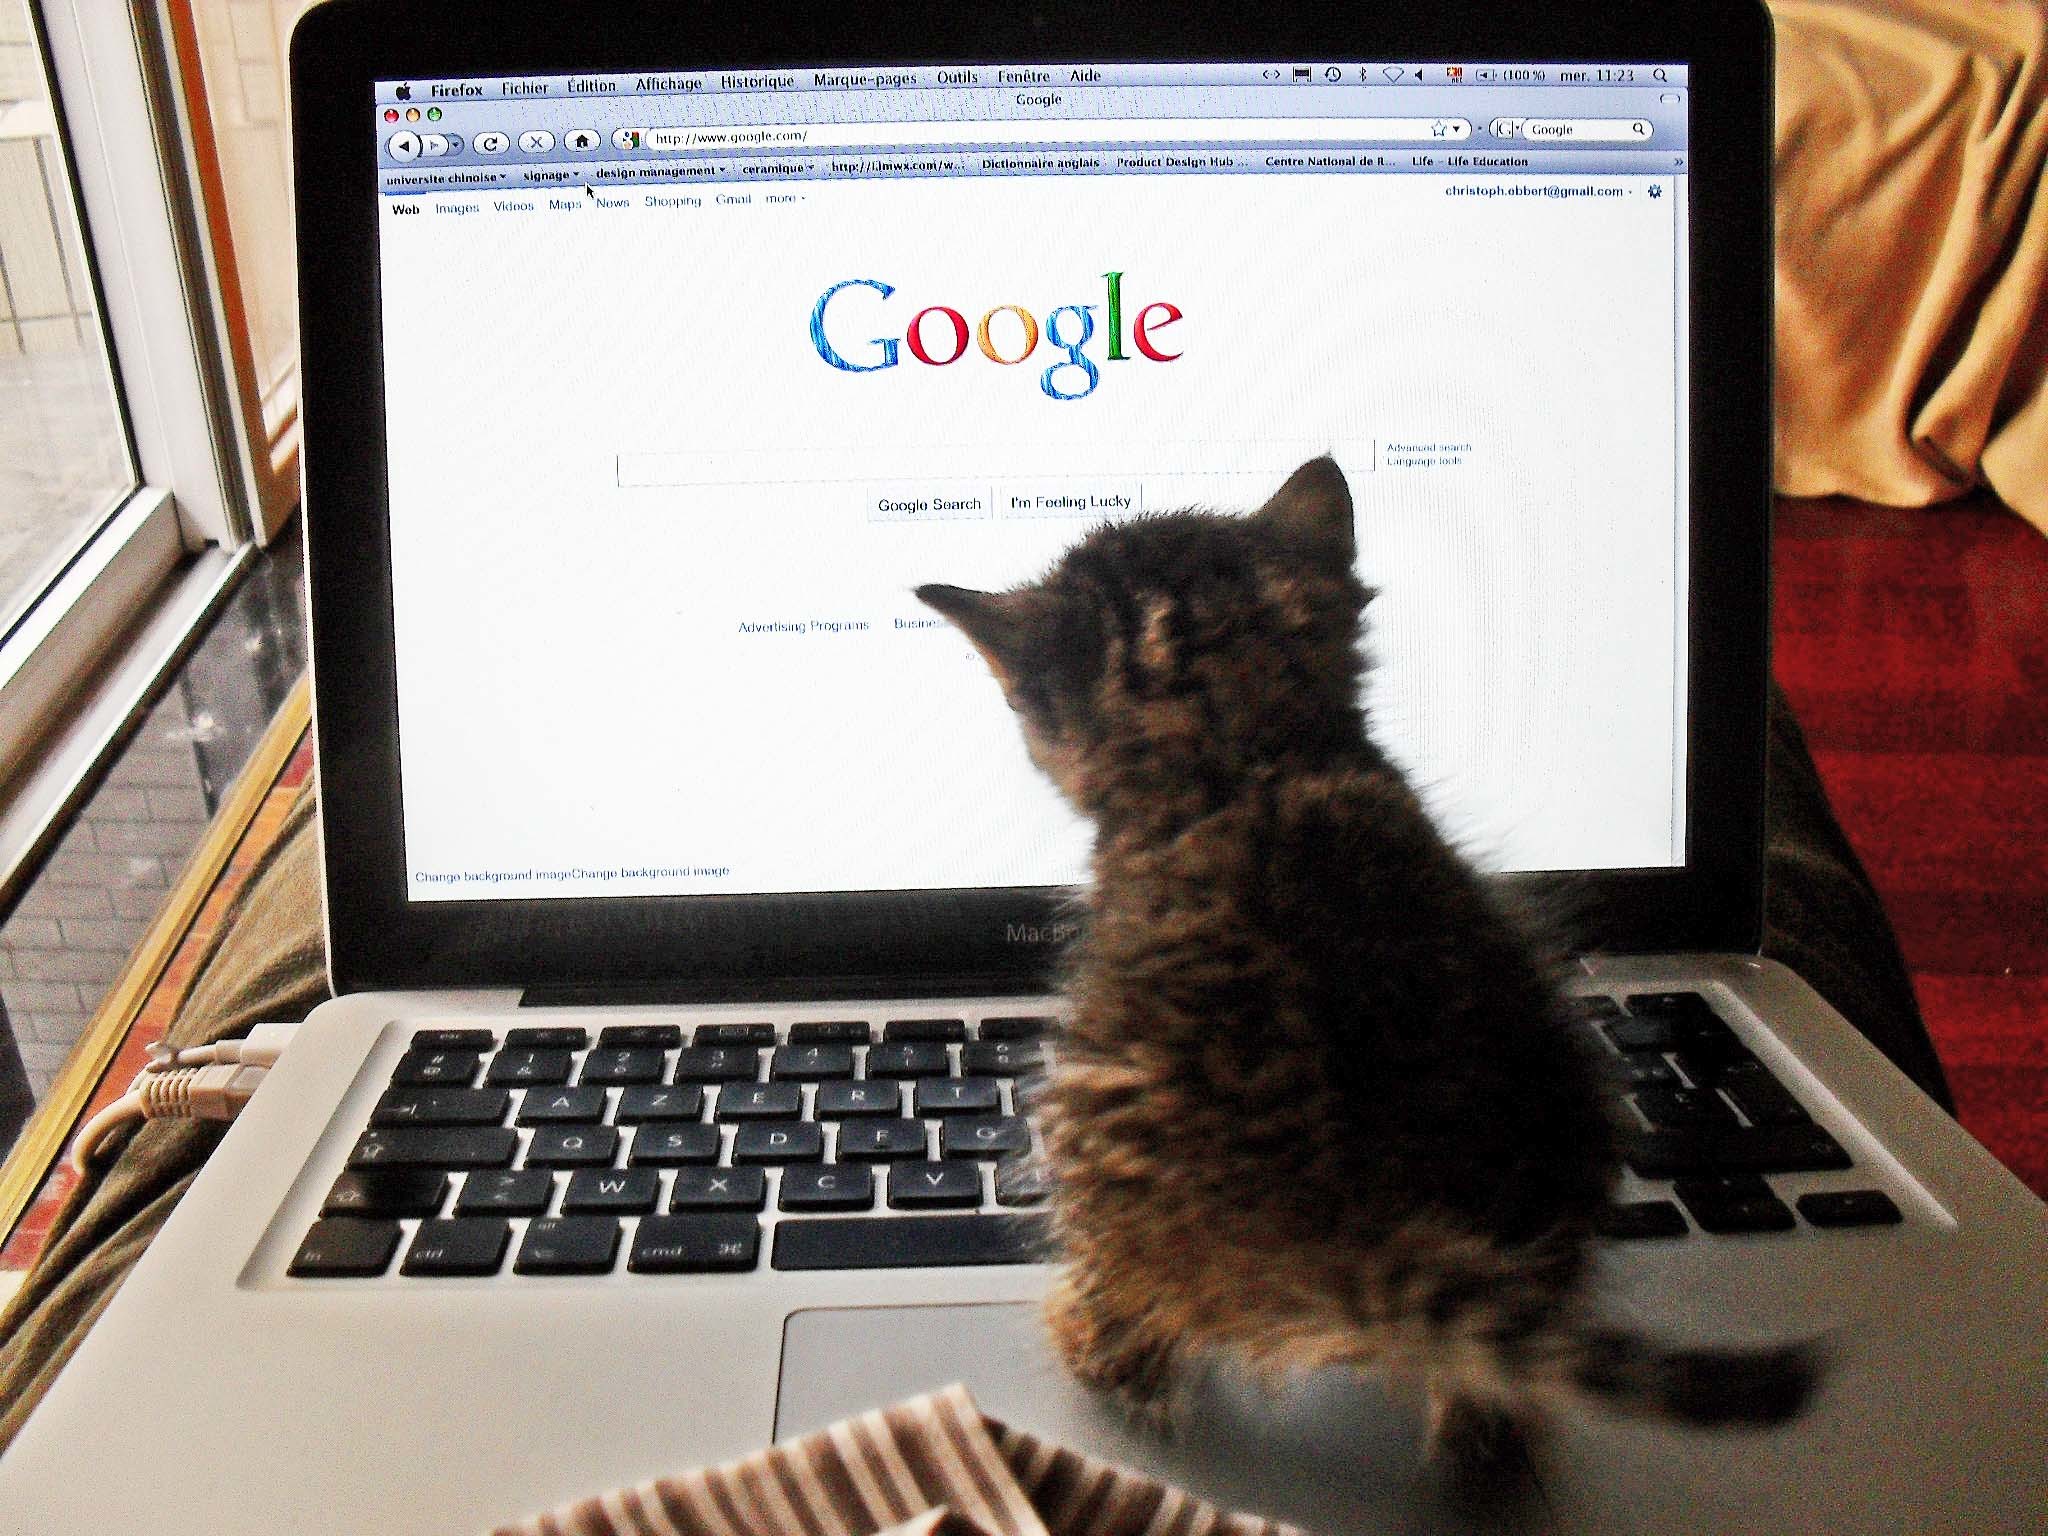 Fluffy had finally found Google, after numerous failed attempts. Next challenge: figuring out how to type “bird.”